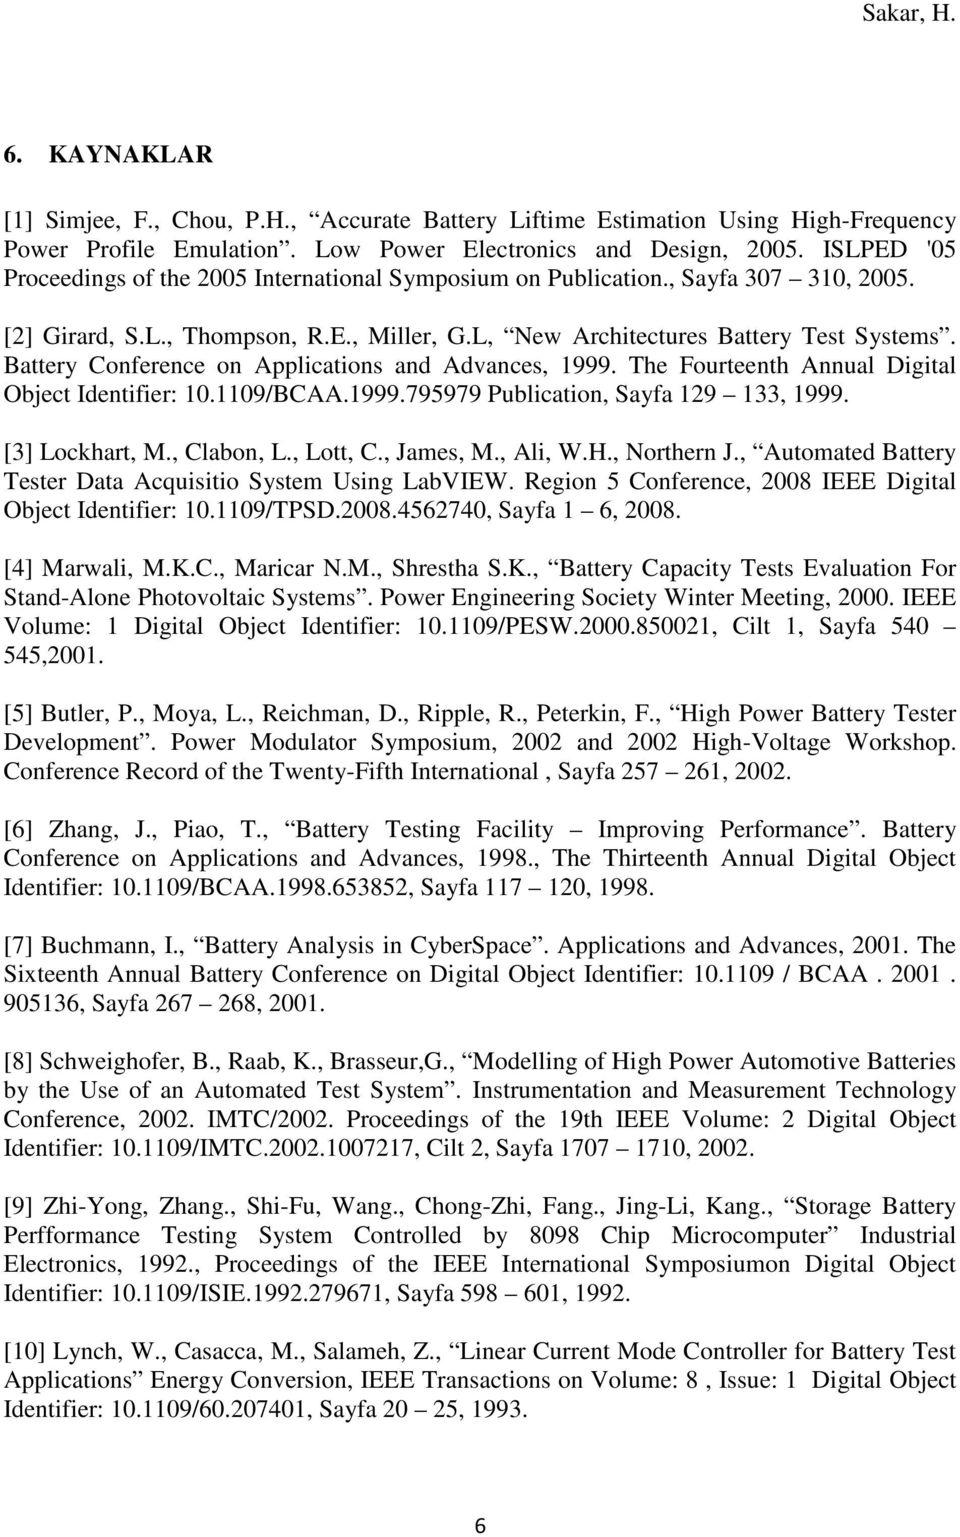 Battery Conference on Applications and Advances, 1999. The Fourteenth Annual Digital Object Identifier: 10.1109/BCAA.1999.795979 Publication, Sayfa 129 133, 1999. [3] Lockhart, M., Clabon, L.